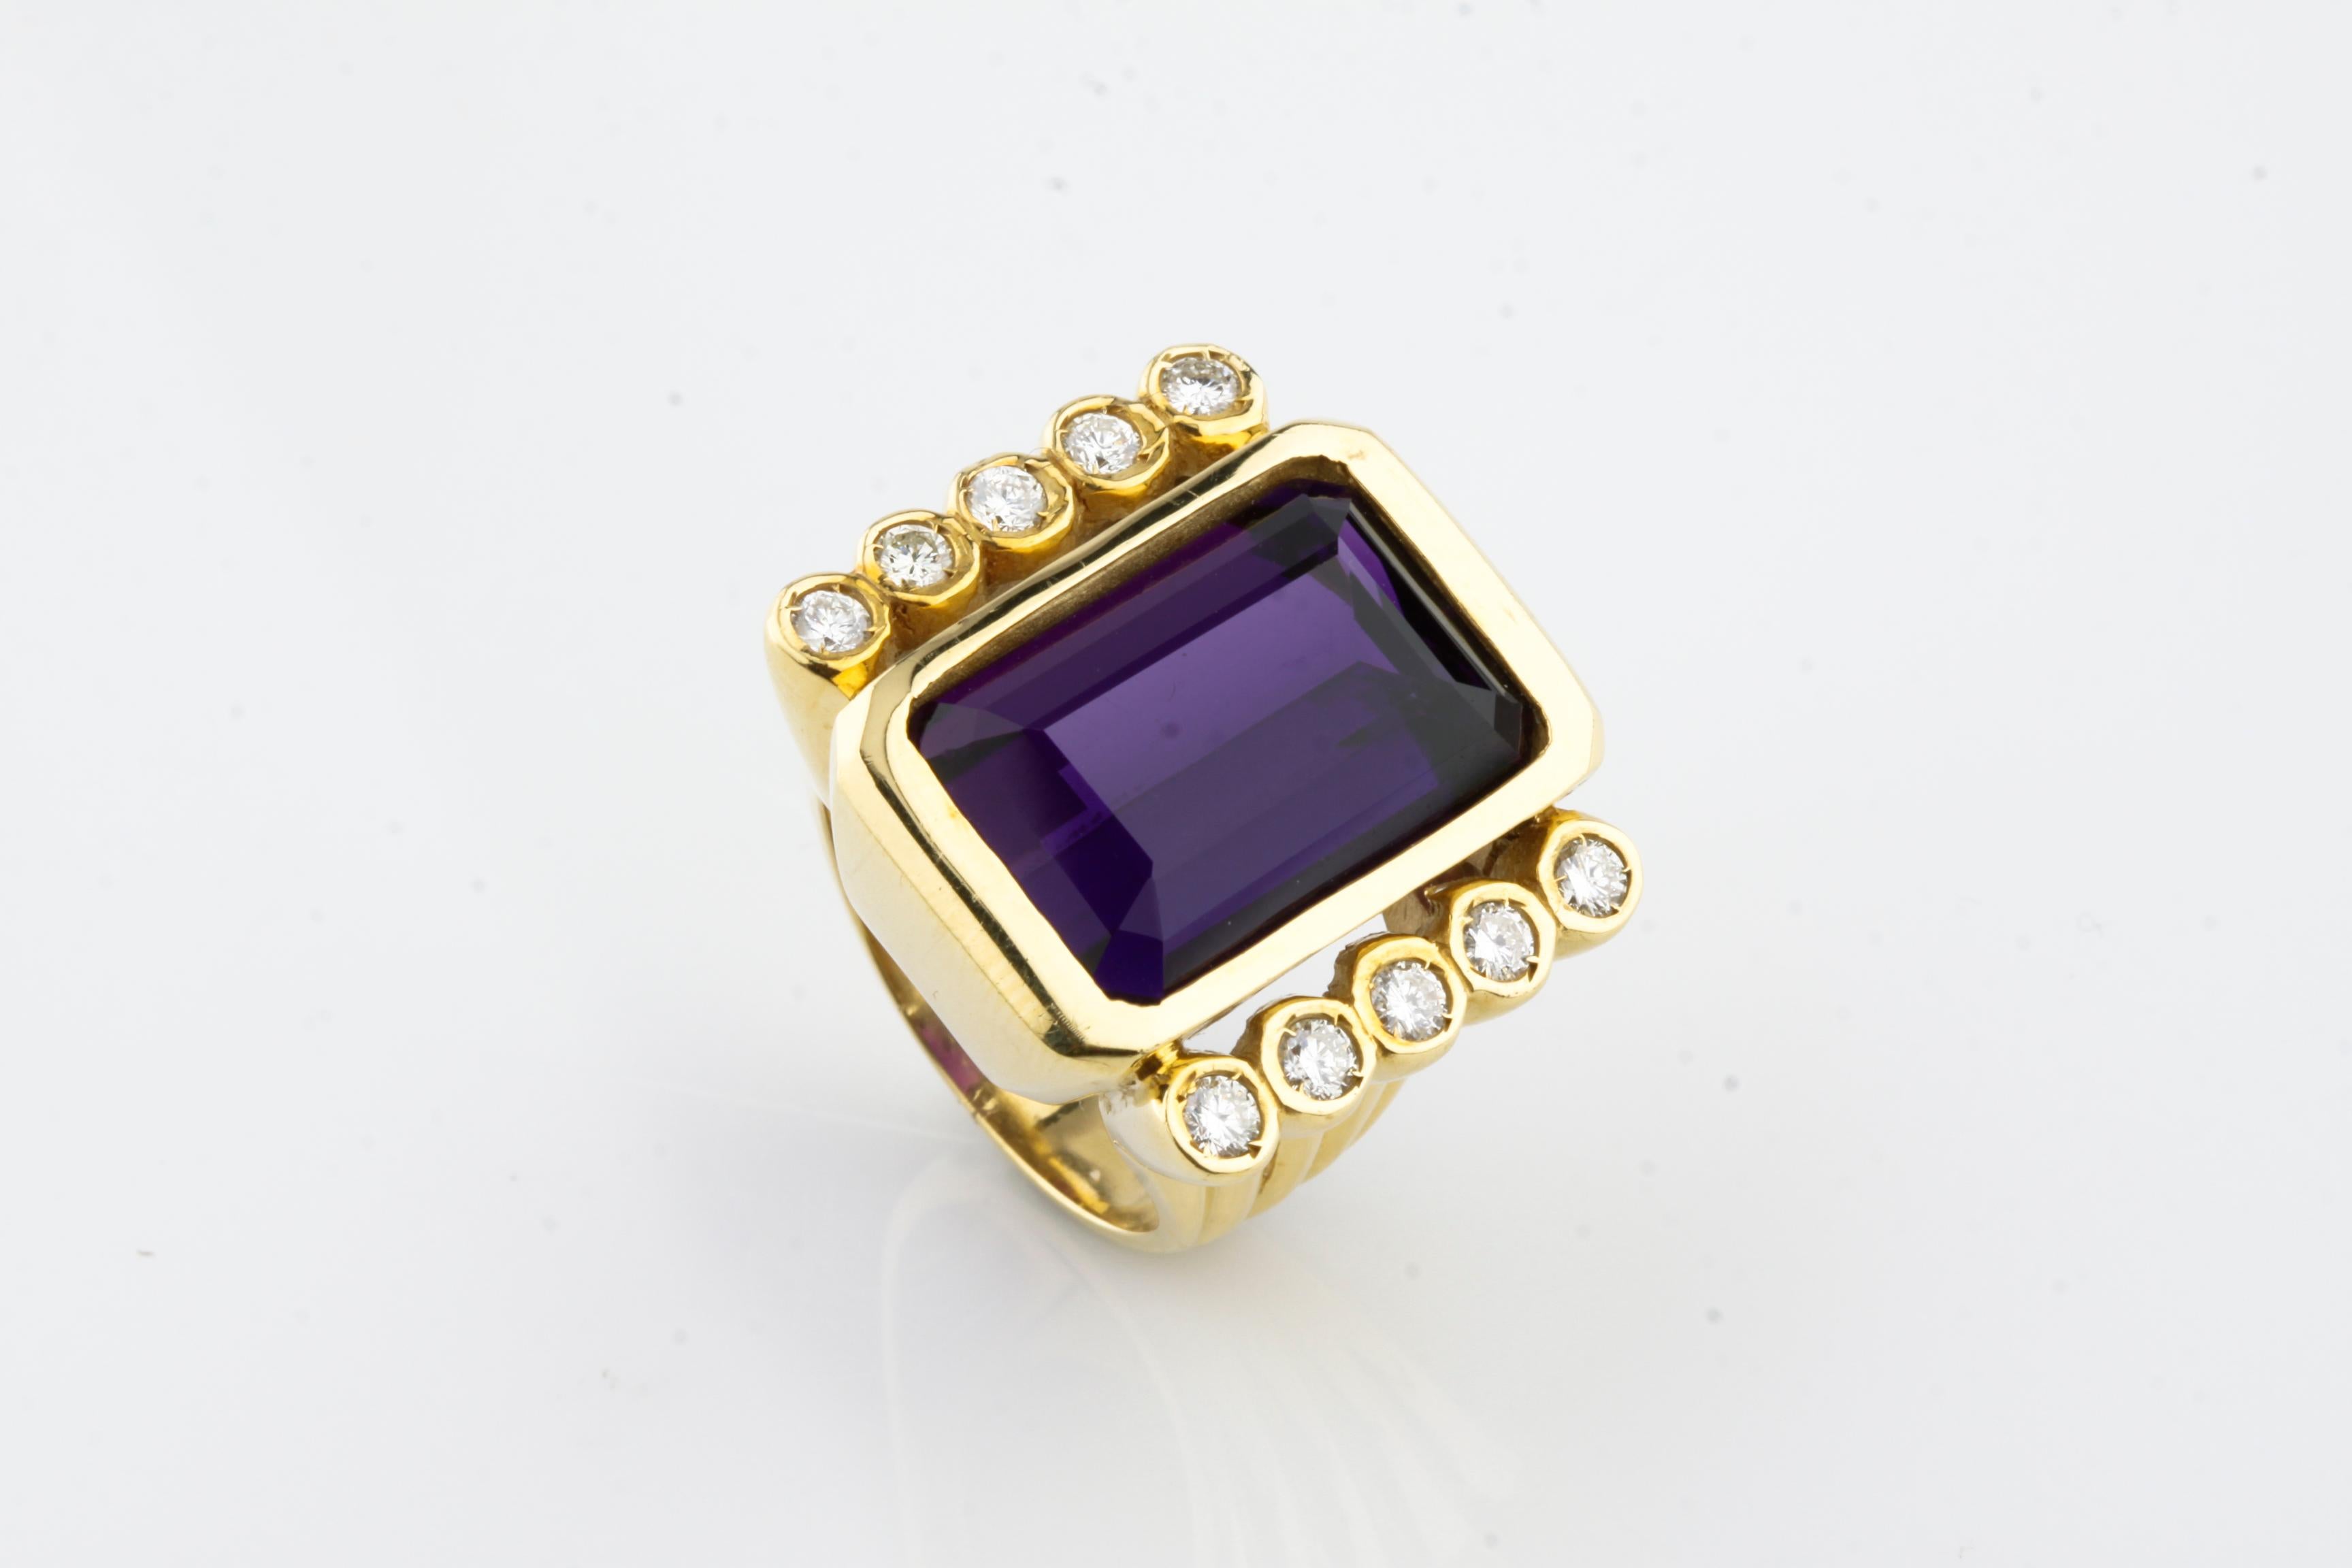 One Electronically tested 18k yellow gold ladies custom cast Amethyst & diamond ring with a bright finish.
Condition Is Very Good.
The Featured Amethyst Is Set Within a Gold Bezel, Supported By Diamond Set, Vertically Scalloped Tapered Shoulders,